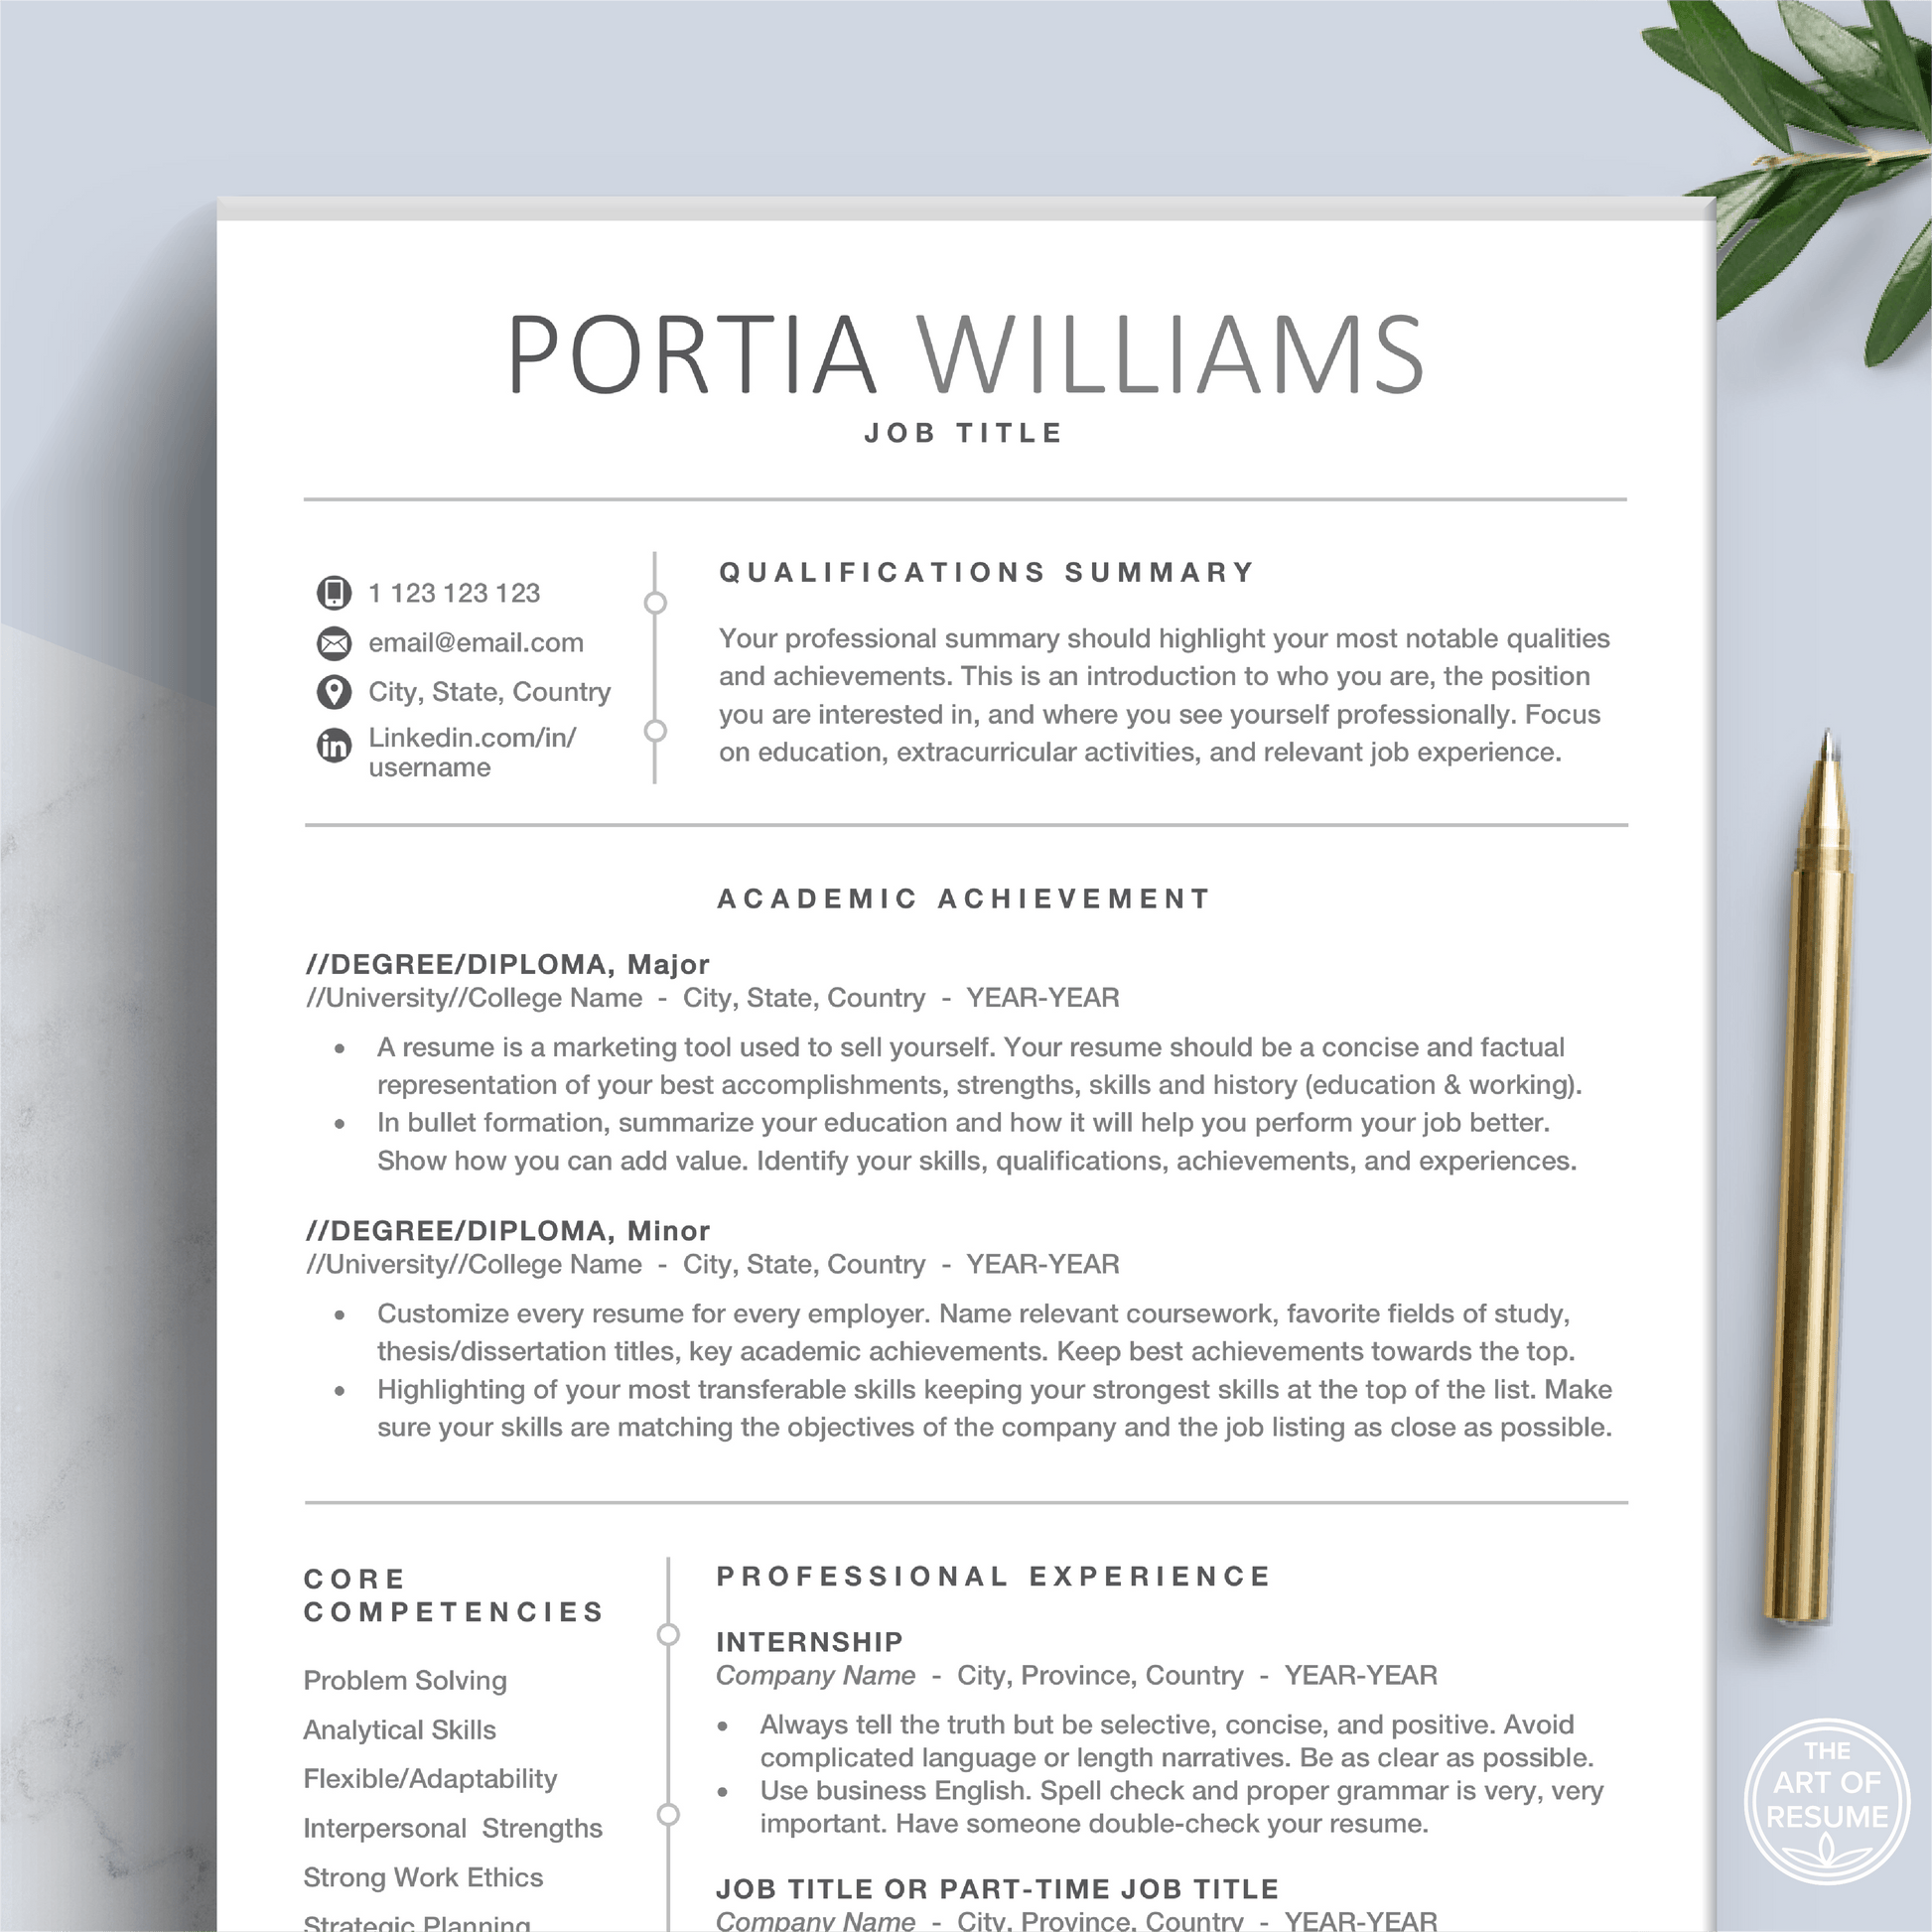 Resume Template for Student | Modern Resume Format for No Experience - The Art of Resume